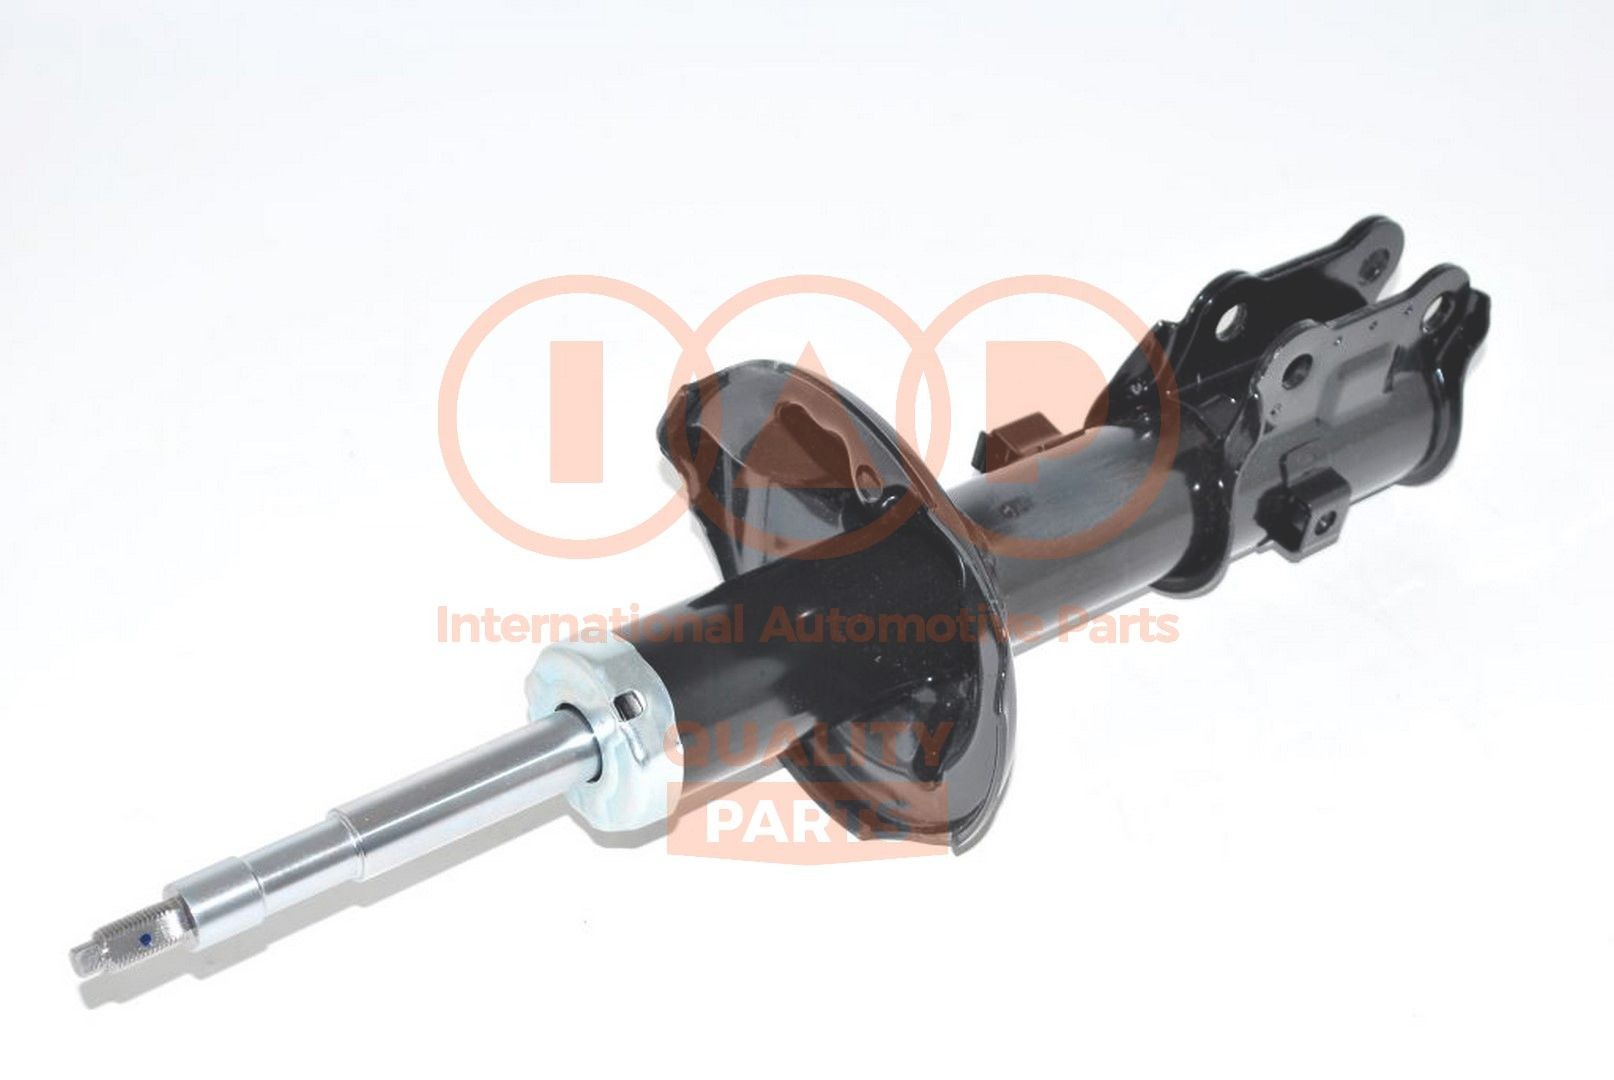 IAP QUALITY PARTS 504-07096 Shock absorber 54650 02510